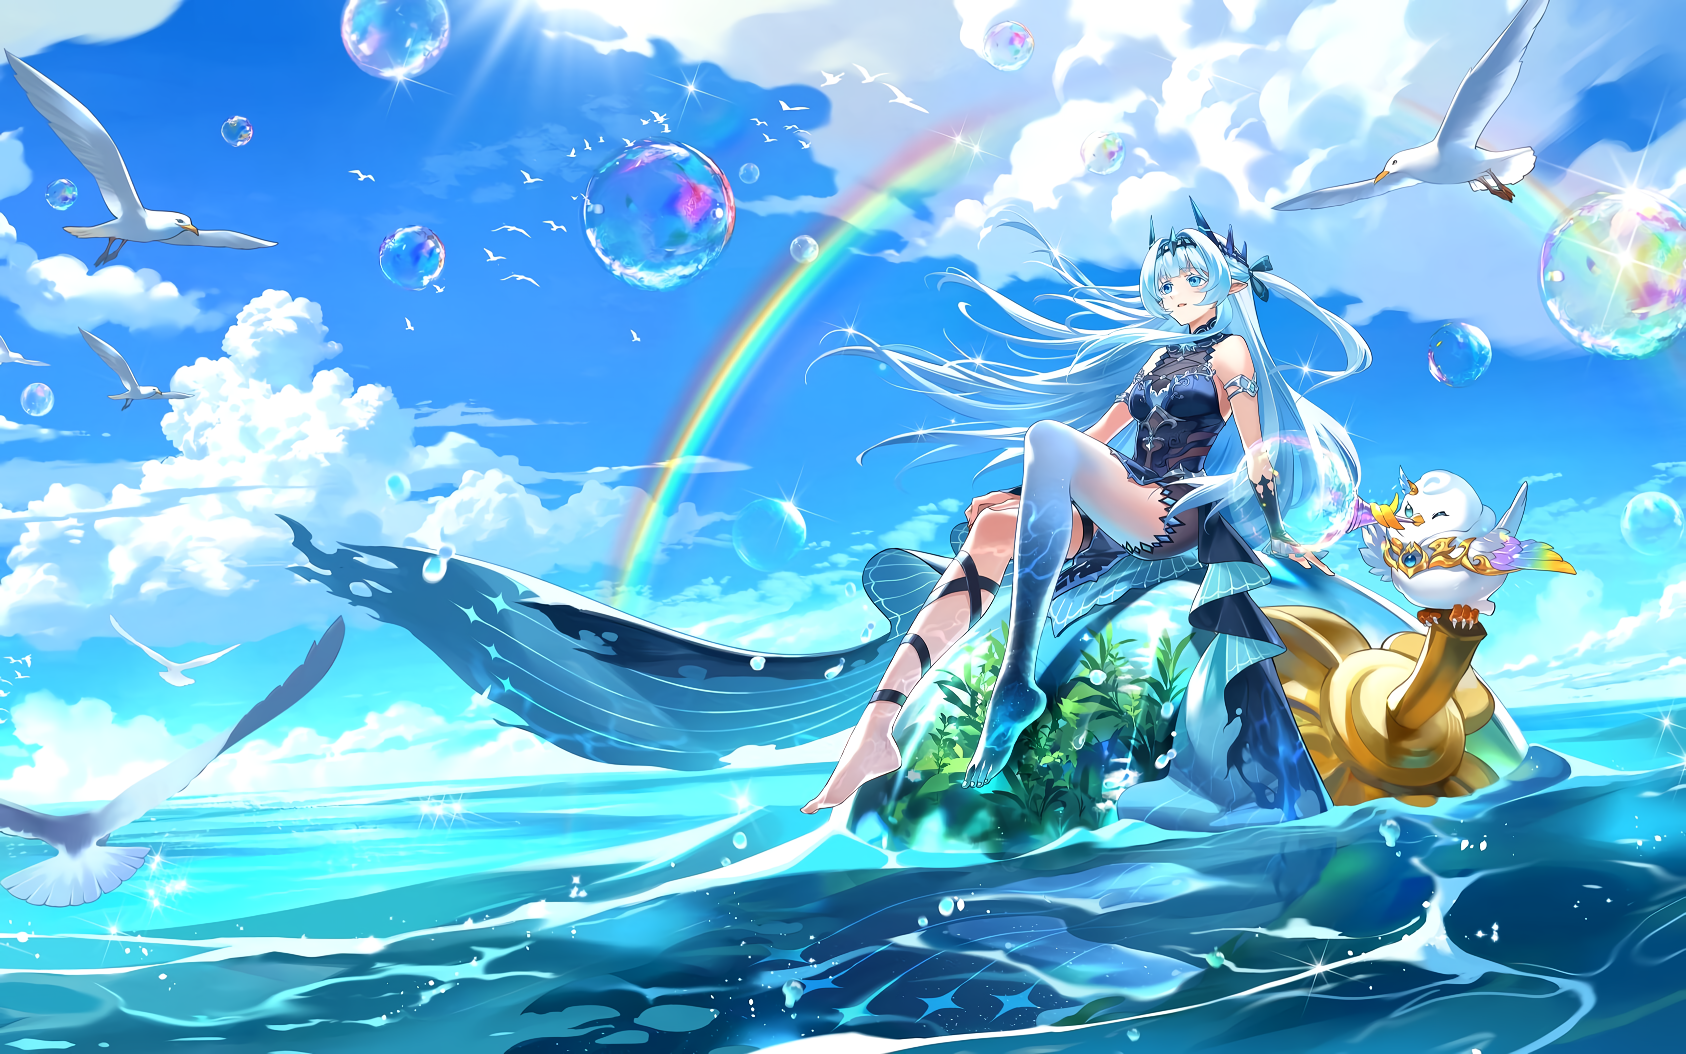 Anime Anime Girls Sea Bubbles Clouds Long Hair Pointy Ears Sky Water Dress Looking Away Rainbows Col 1686x1054